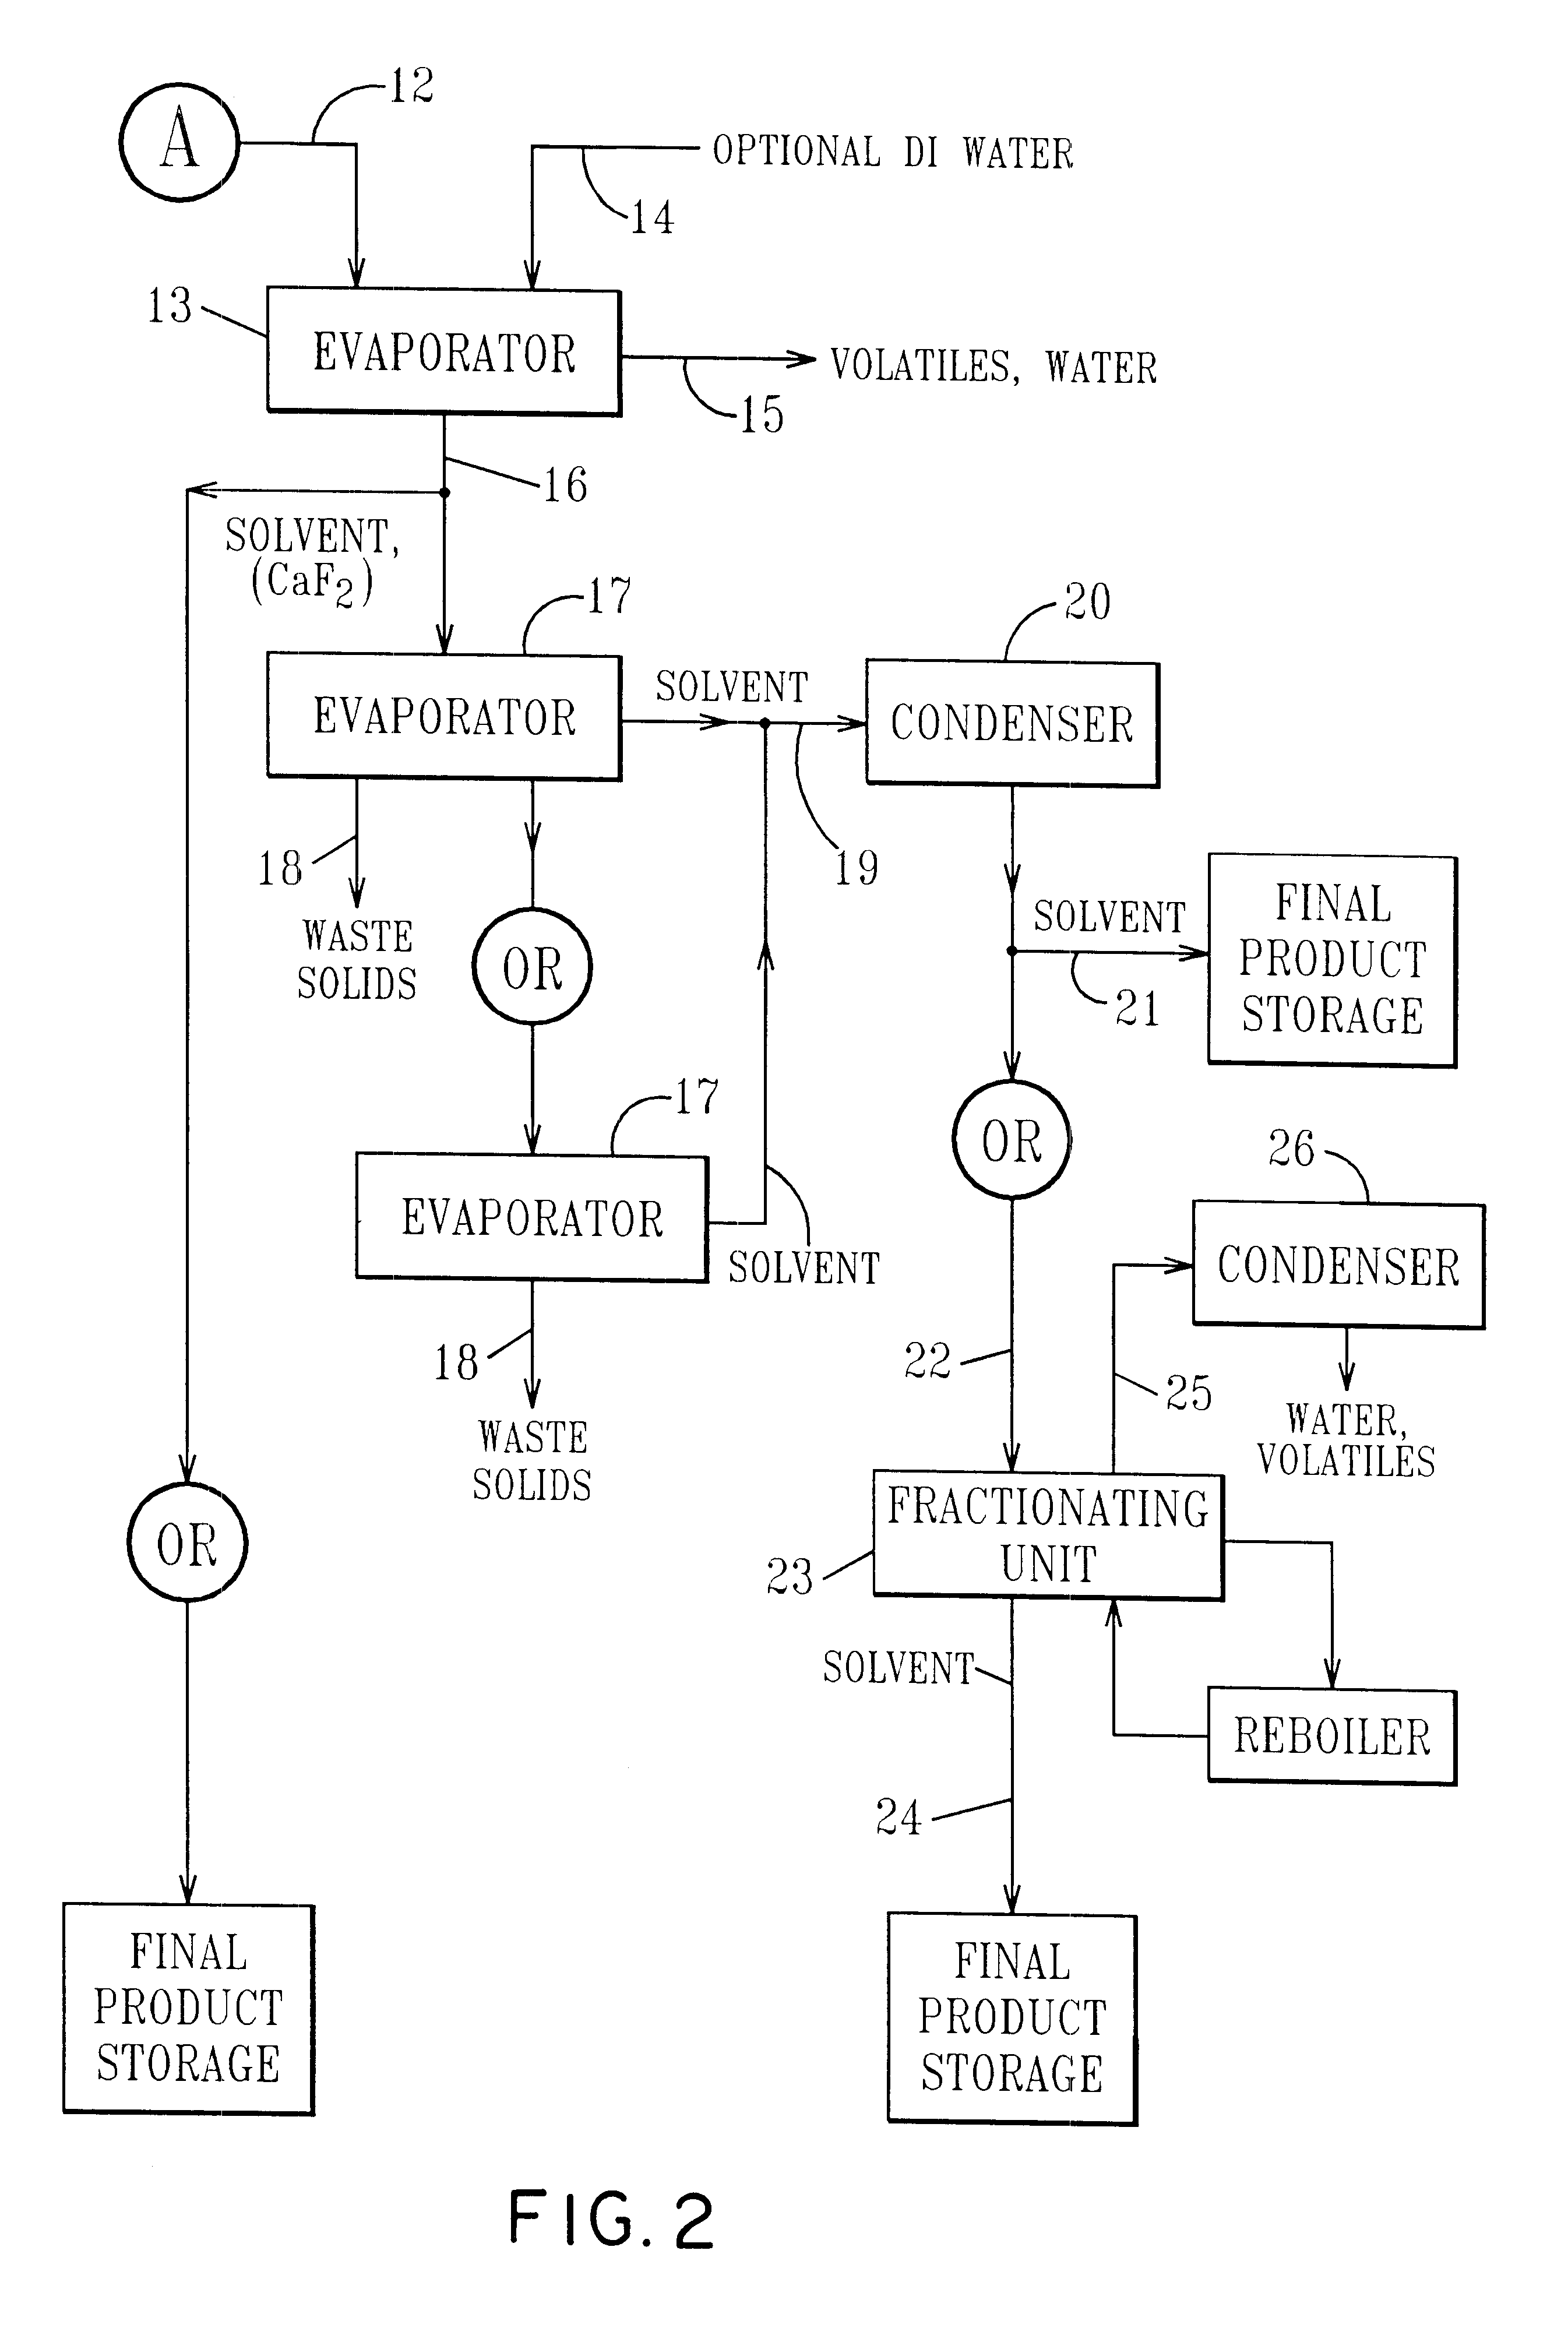 Method for recovering an organic solvent from an acidic waste stream such as in integrated chip manufacturing